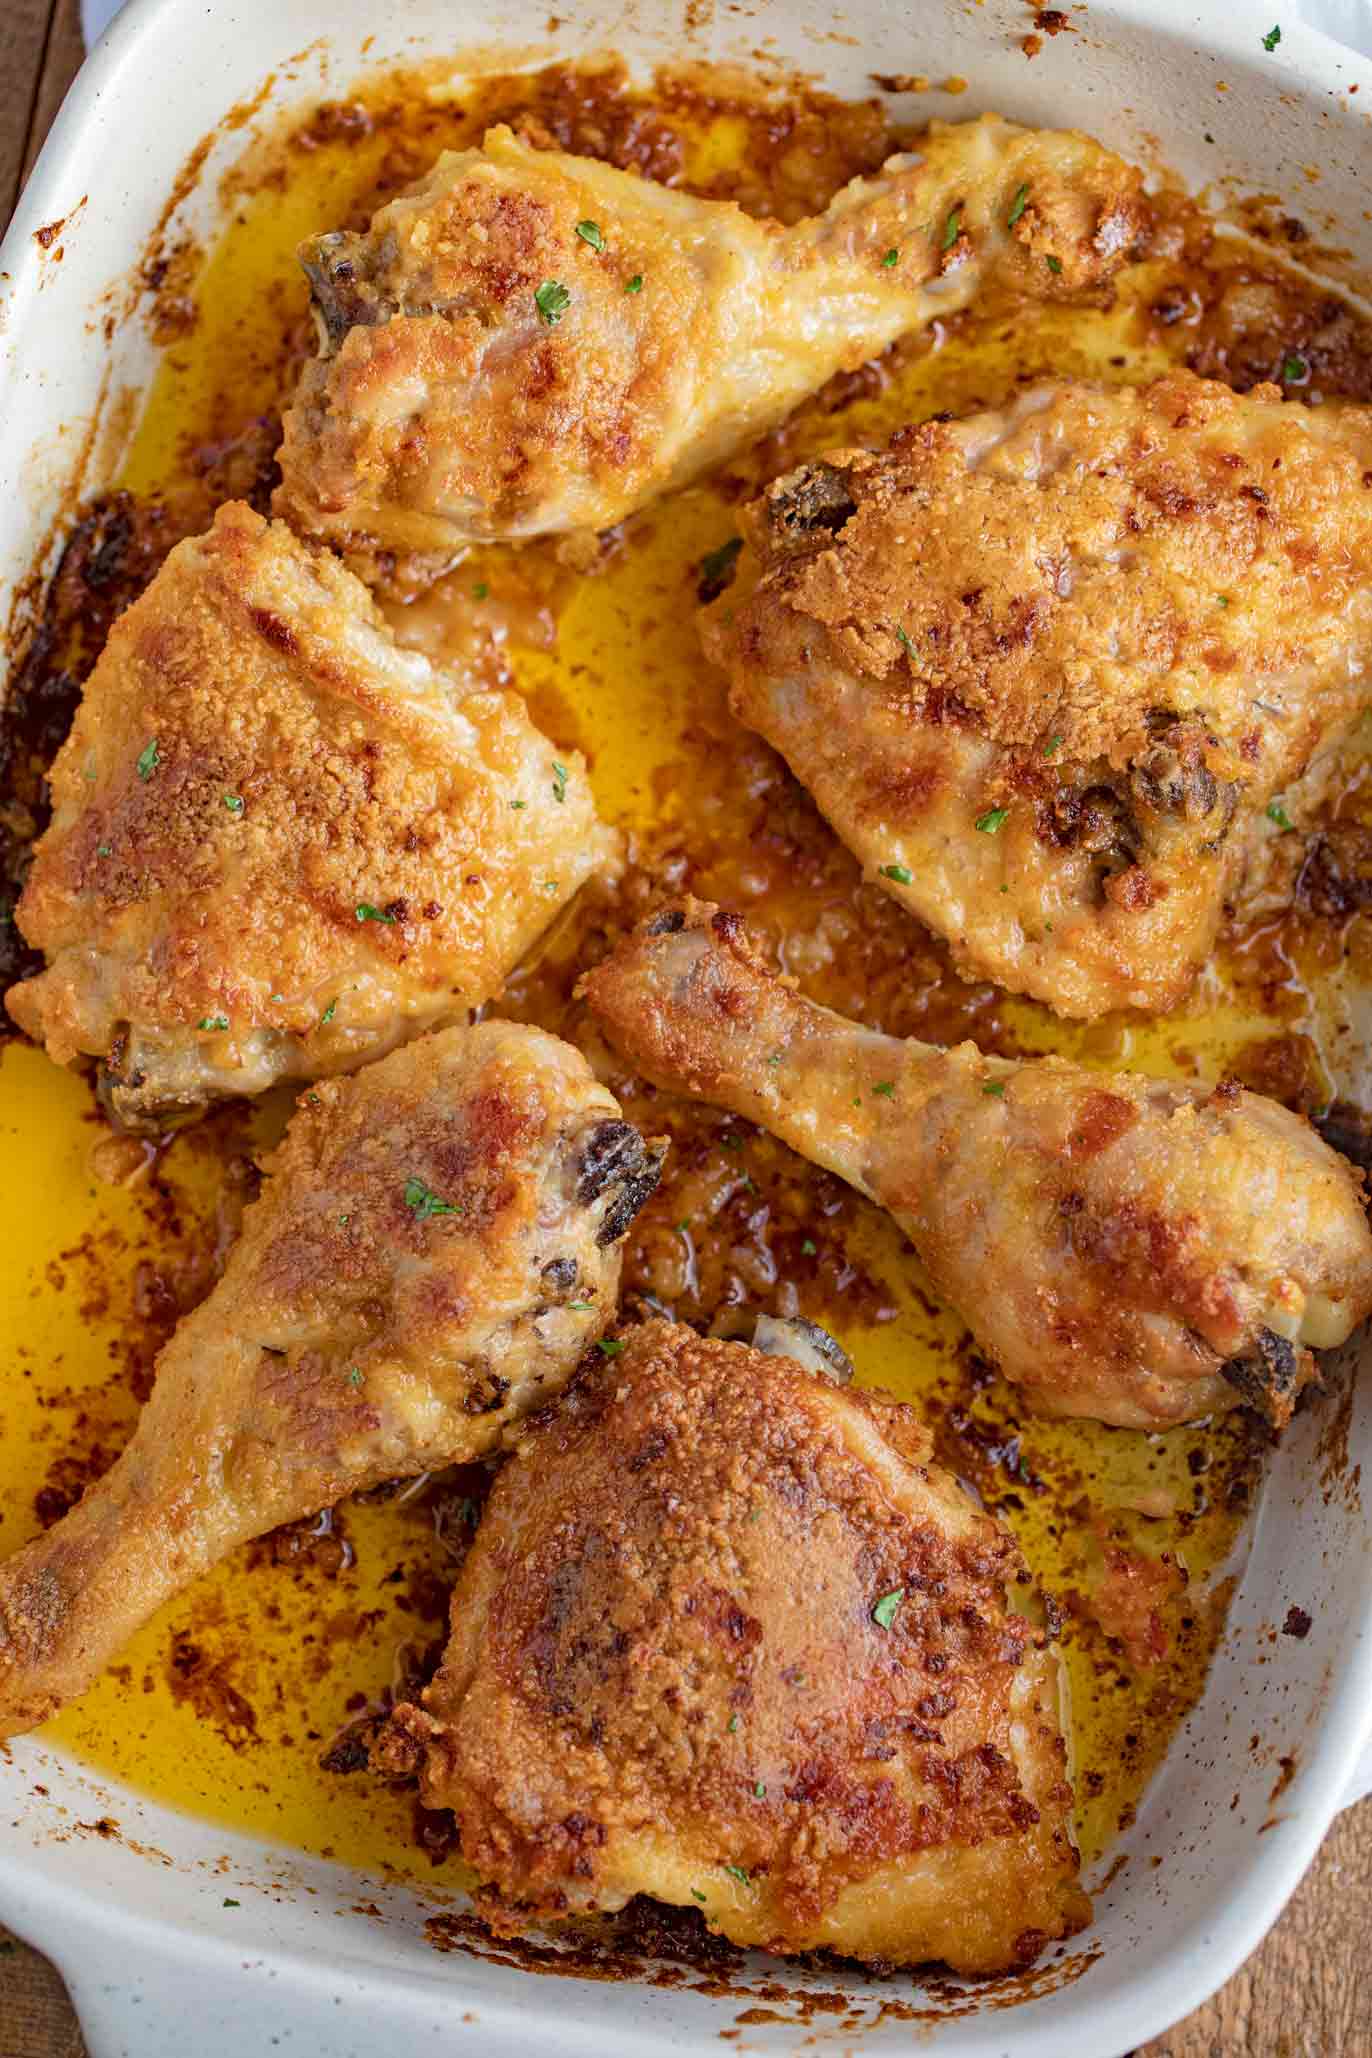 Sale > oven baked southern fried chicken recipe > in stock